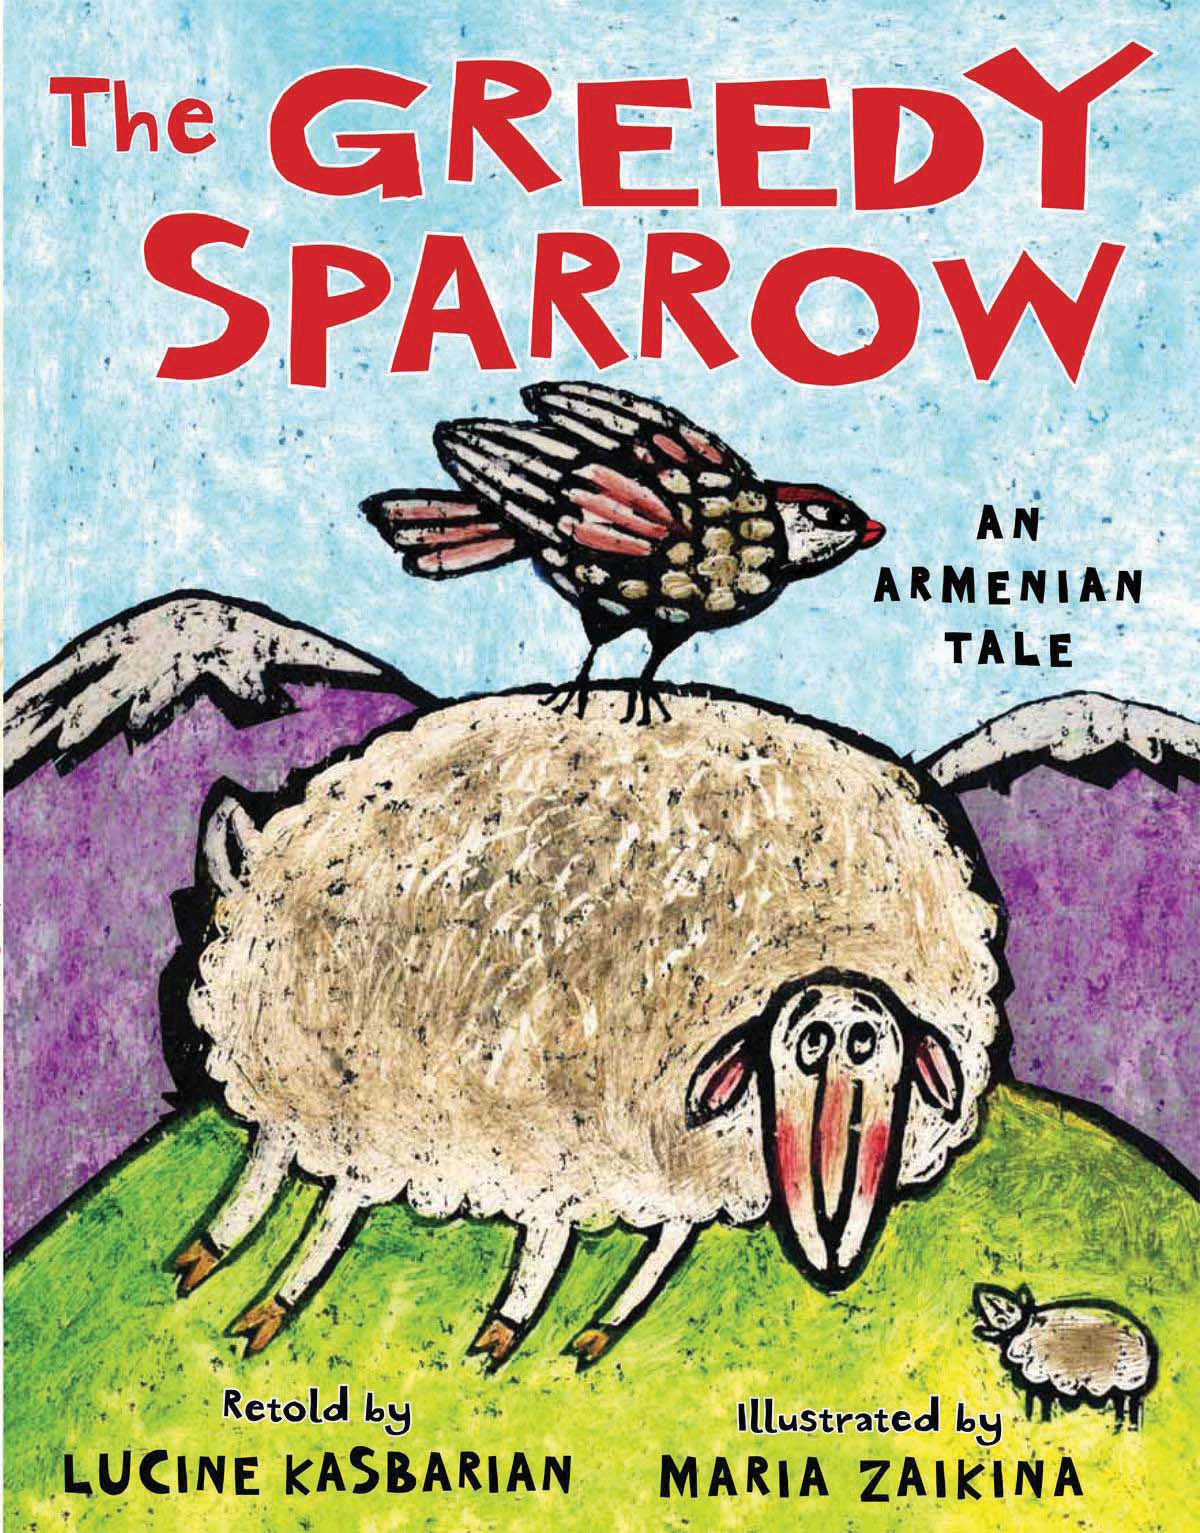 Book cover for "The Greedy Sparrow: An Armenian Tale" depicting a sparrow sitting on top of a sheep